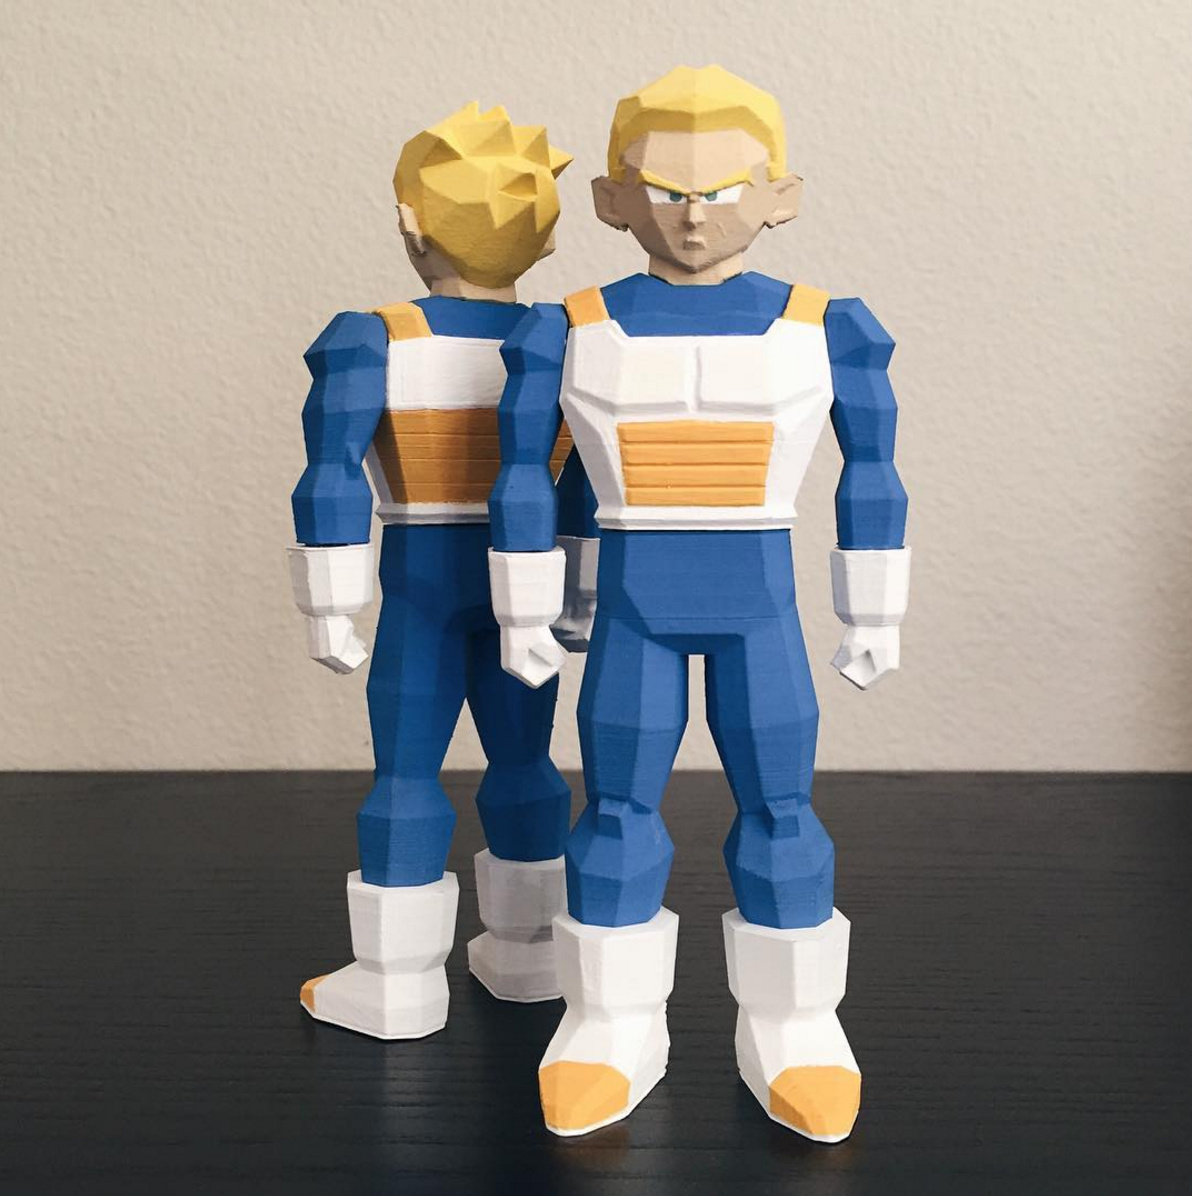 3D Printed Low Poly Vegeta from Dragon Ball Z - Show and tell - Talk Manufacturing | 3D Hubs